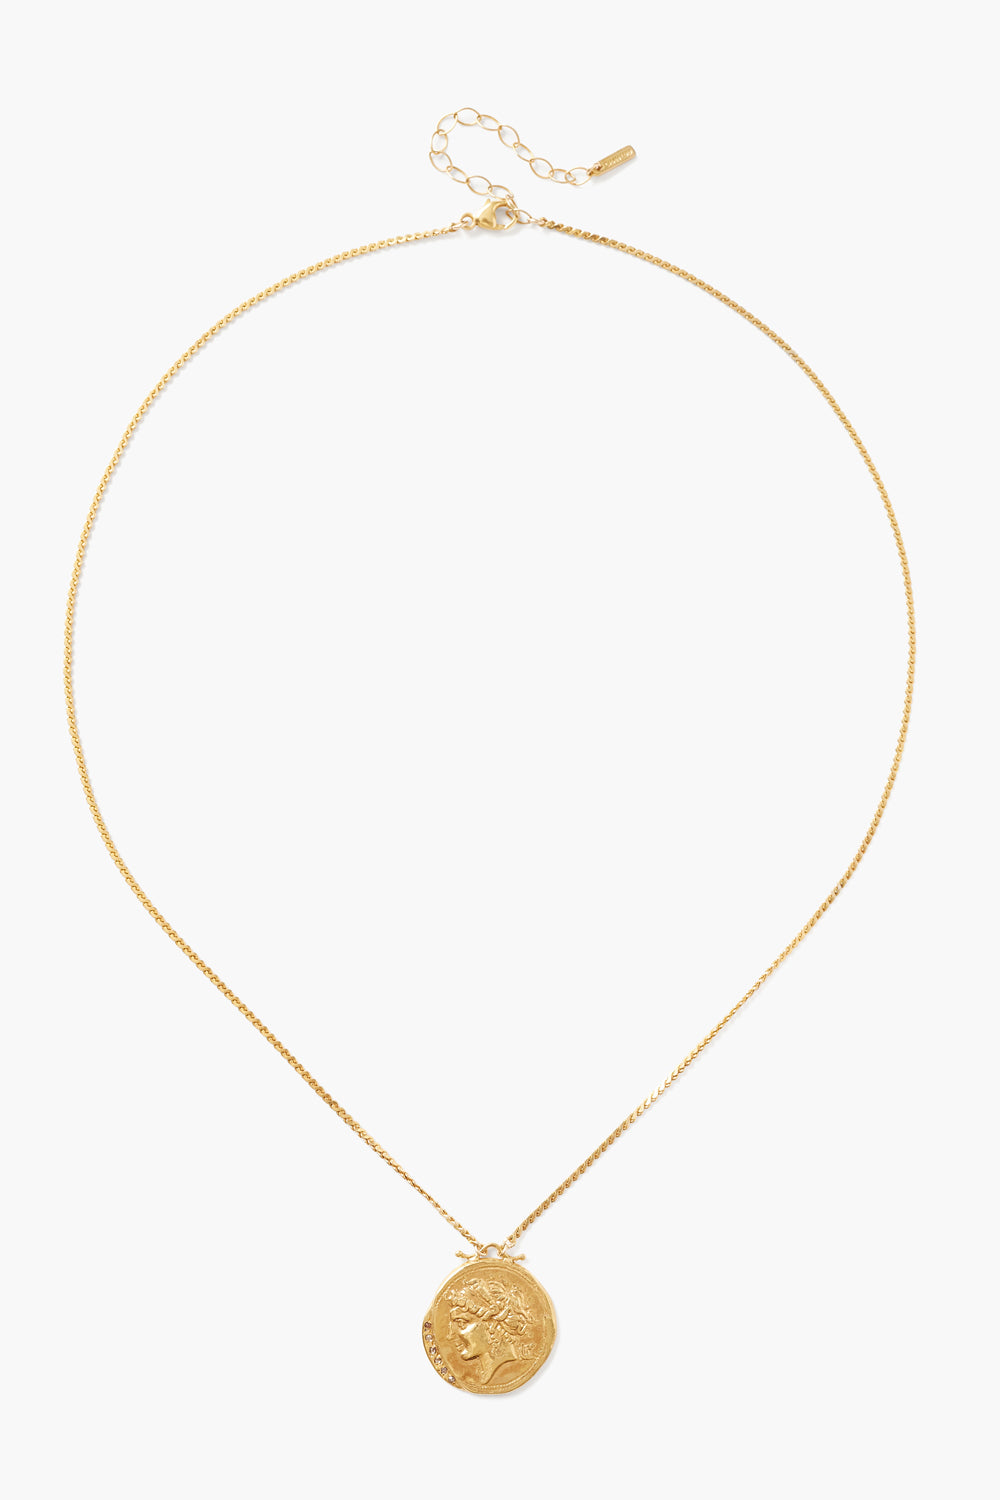 Chan Luu Gold Coin Necklace With Diamonds - Dear Lucy